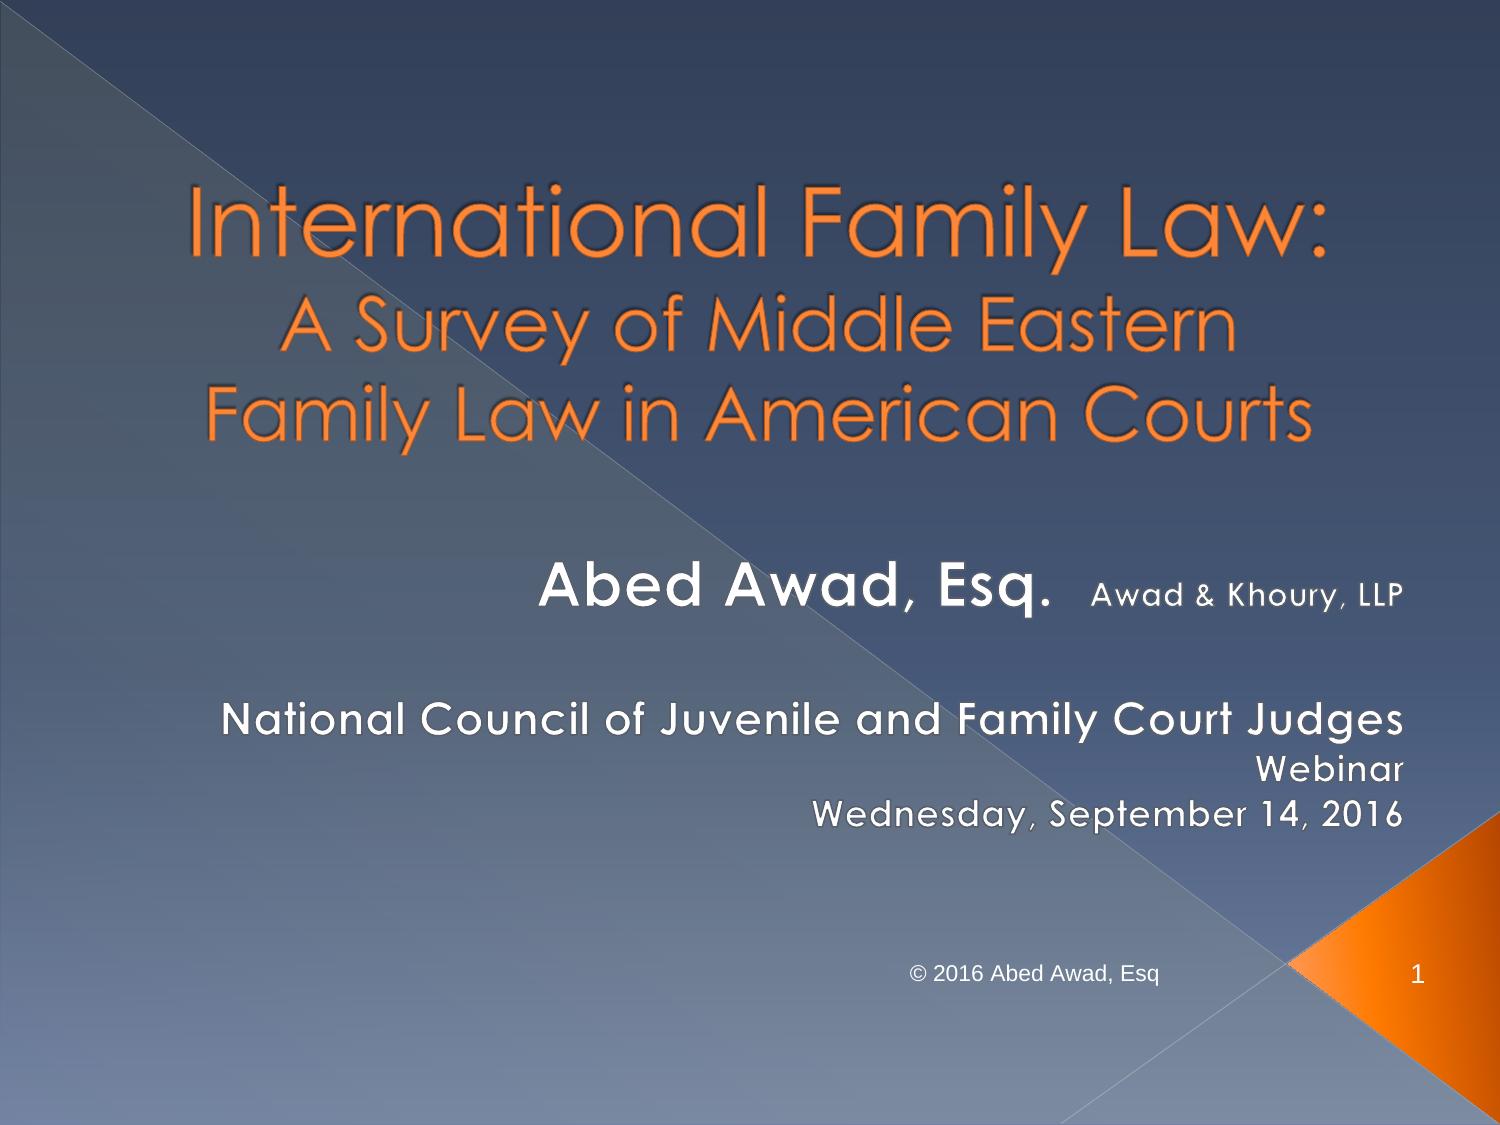 Islamic Family Law in American Courts